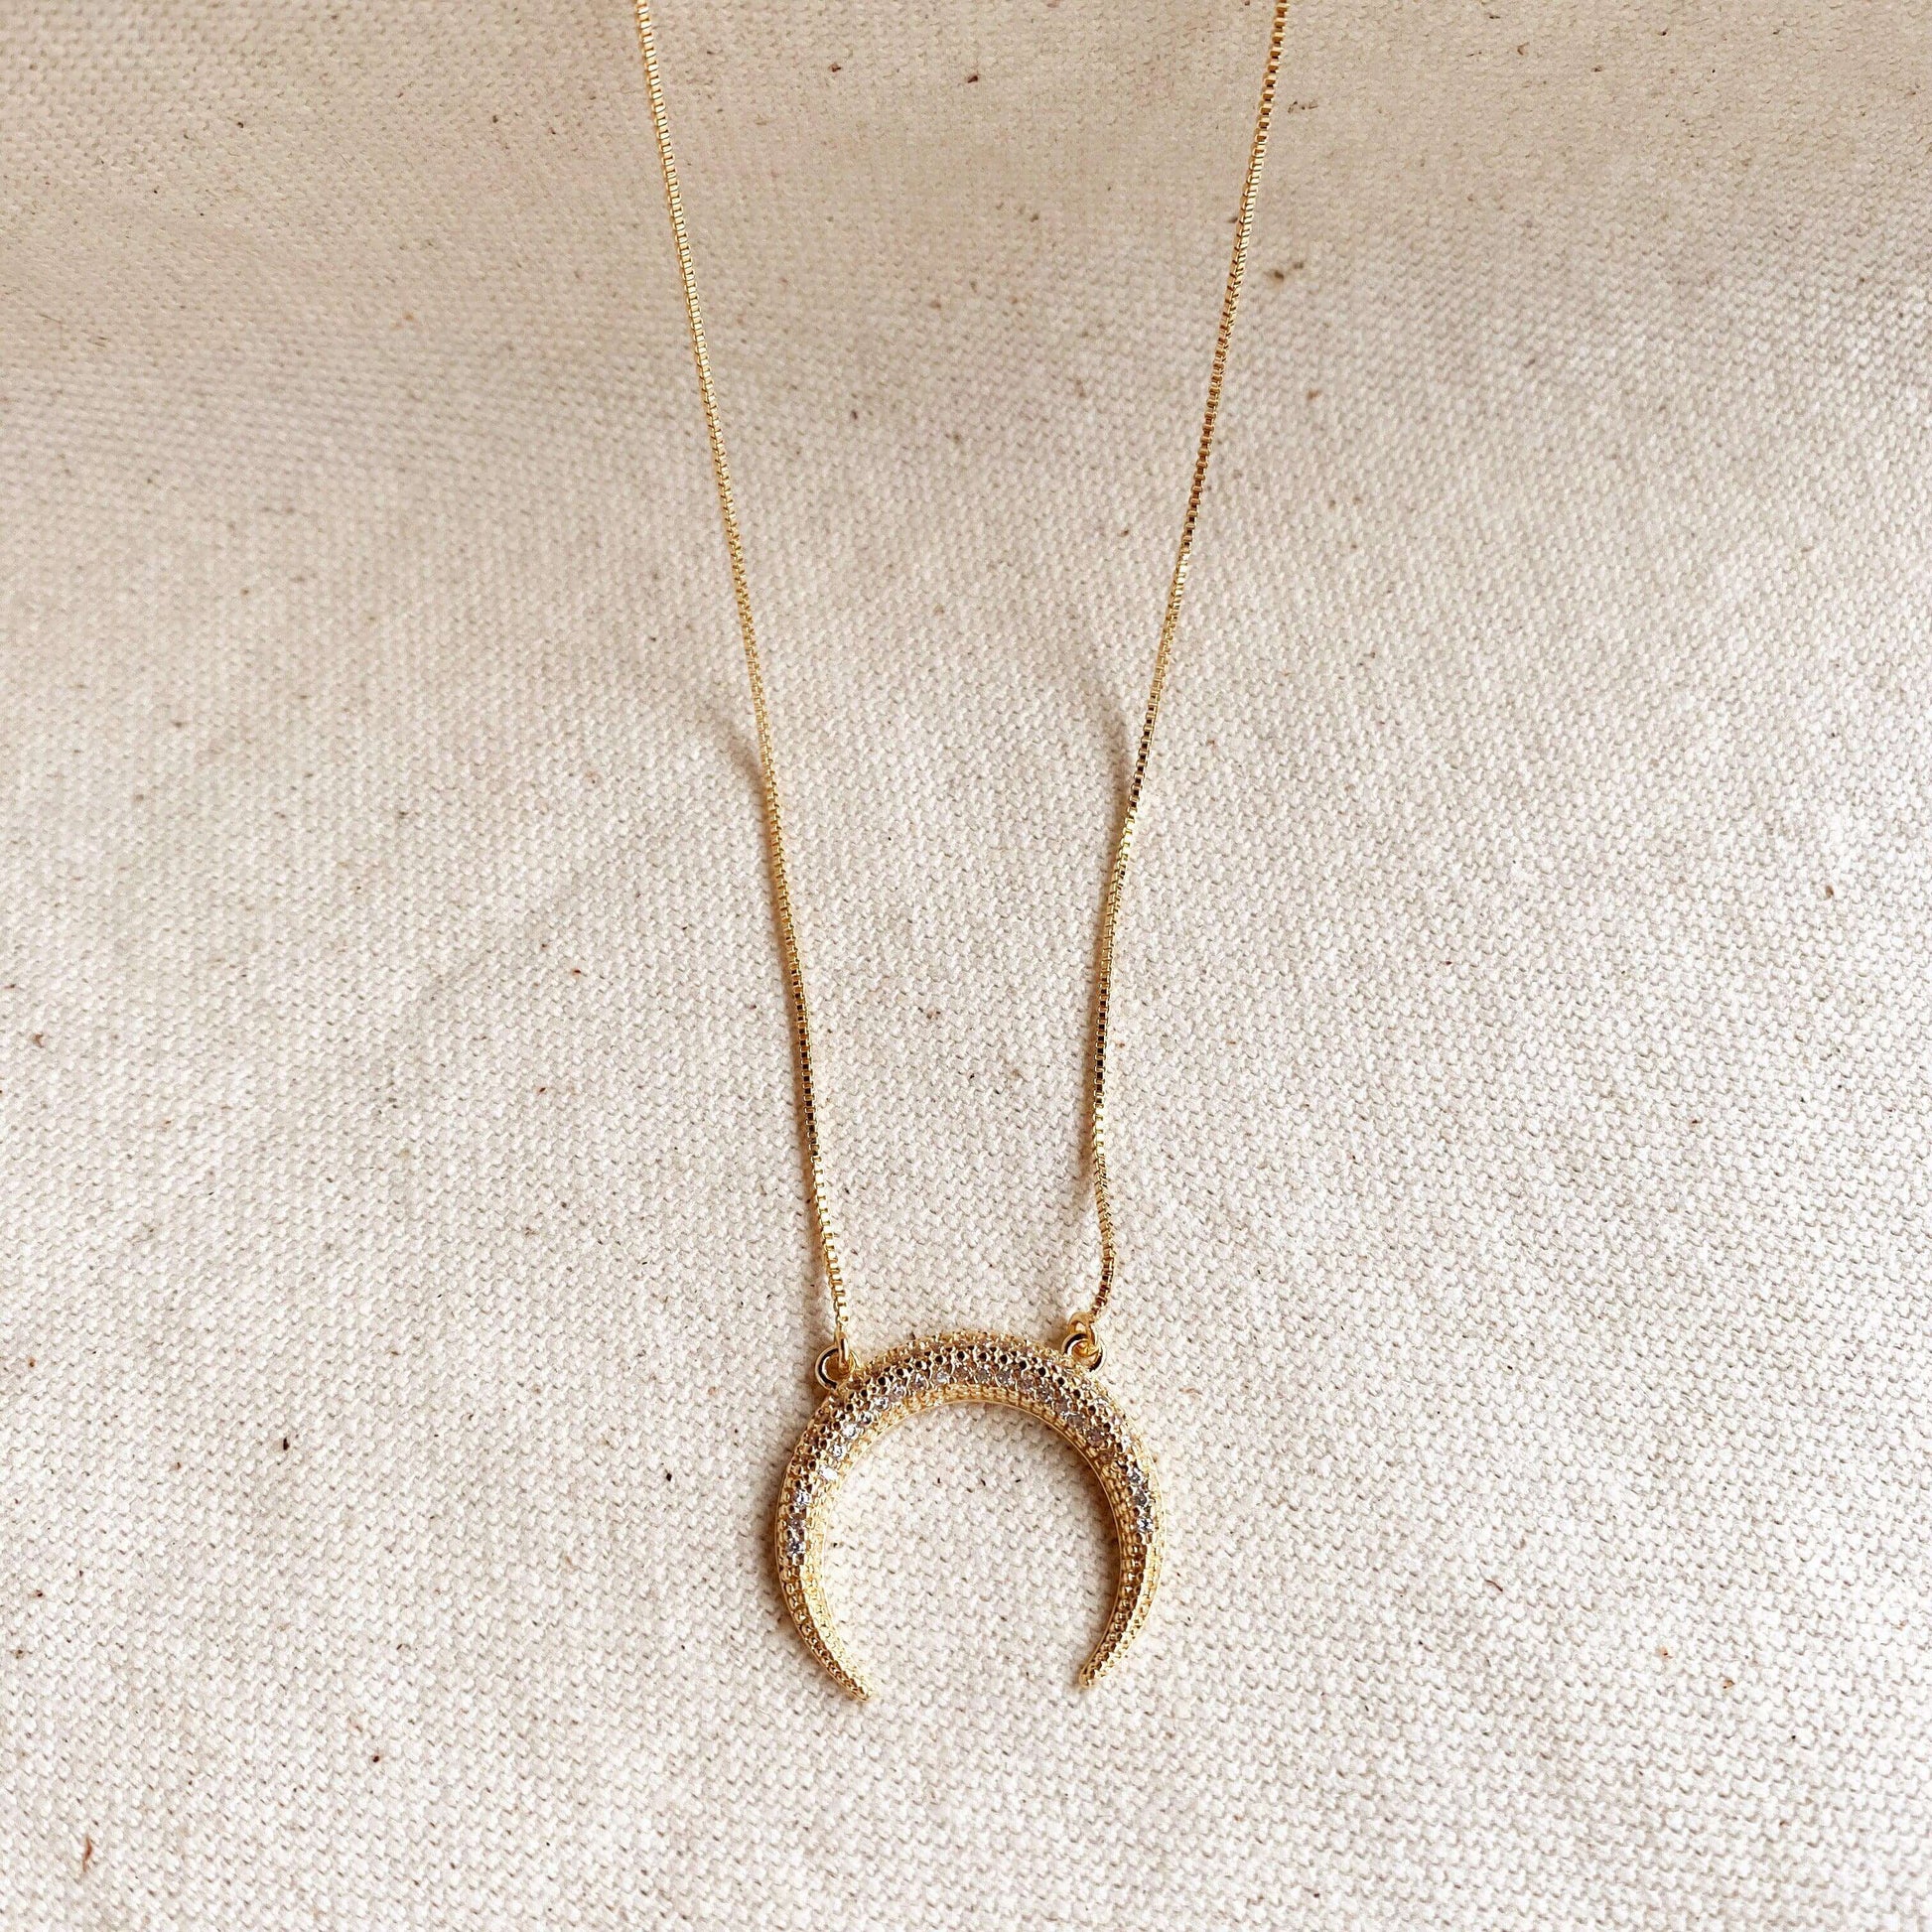 GoldFi Cubic Zirconia 18k Gold Filled Crescent Moon Necklace